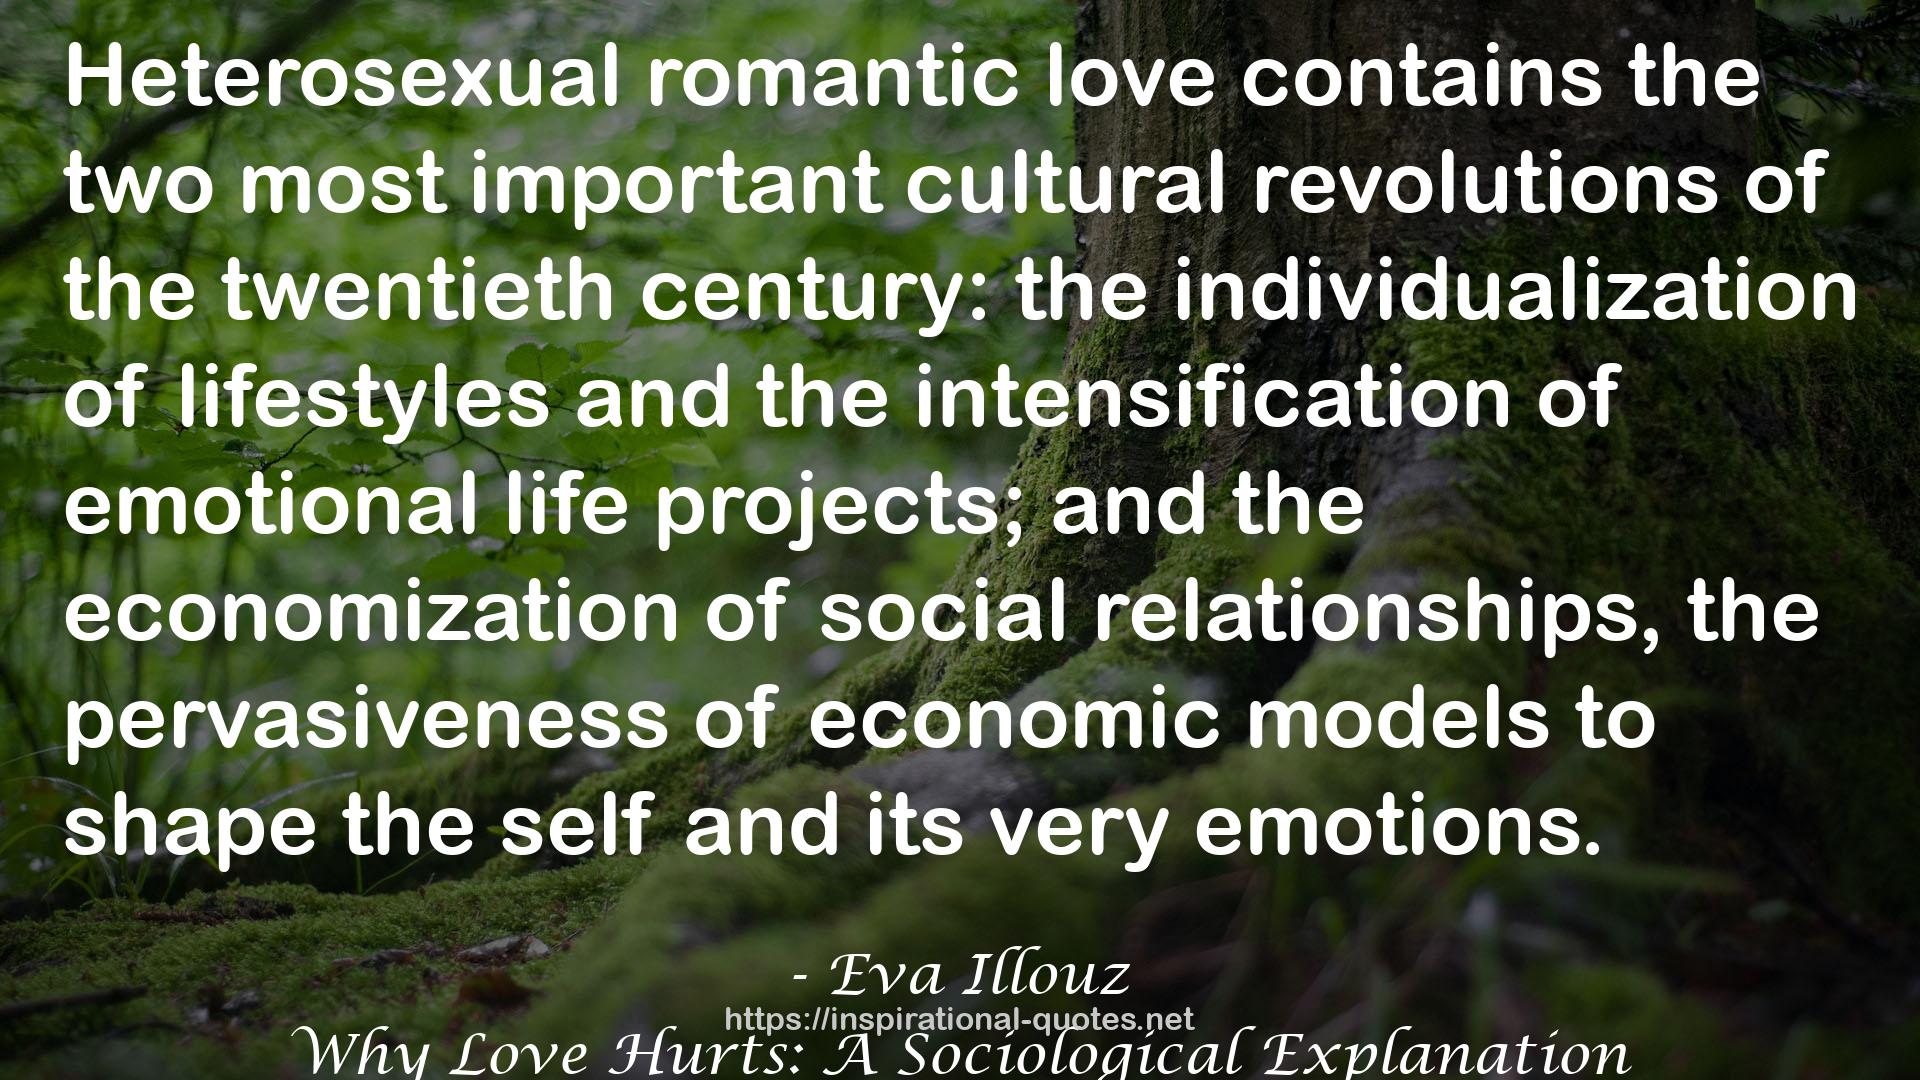 Why Love Hurts: A Sociological Explanation QUOTES